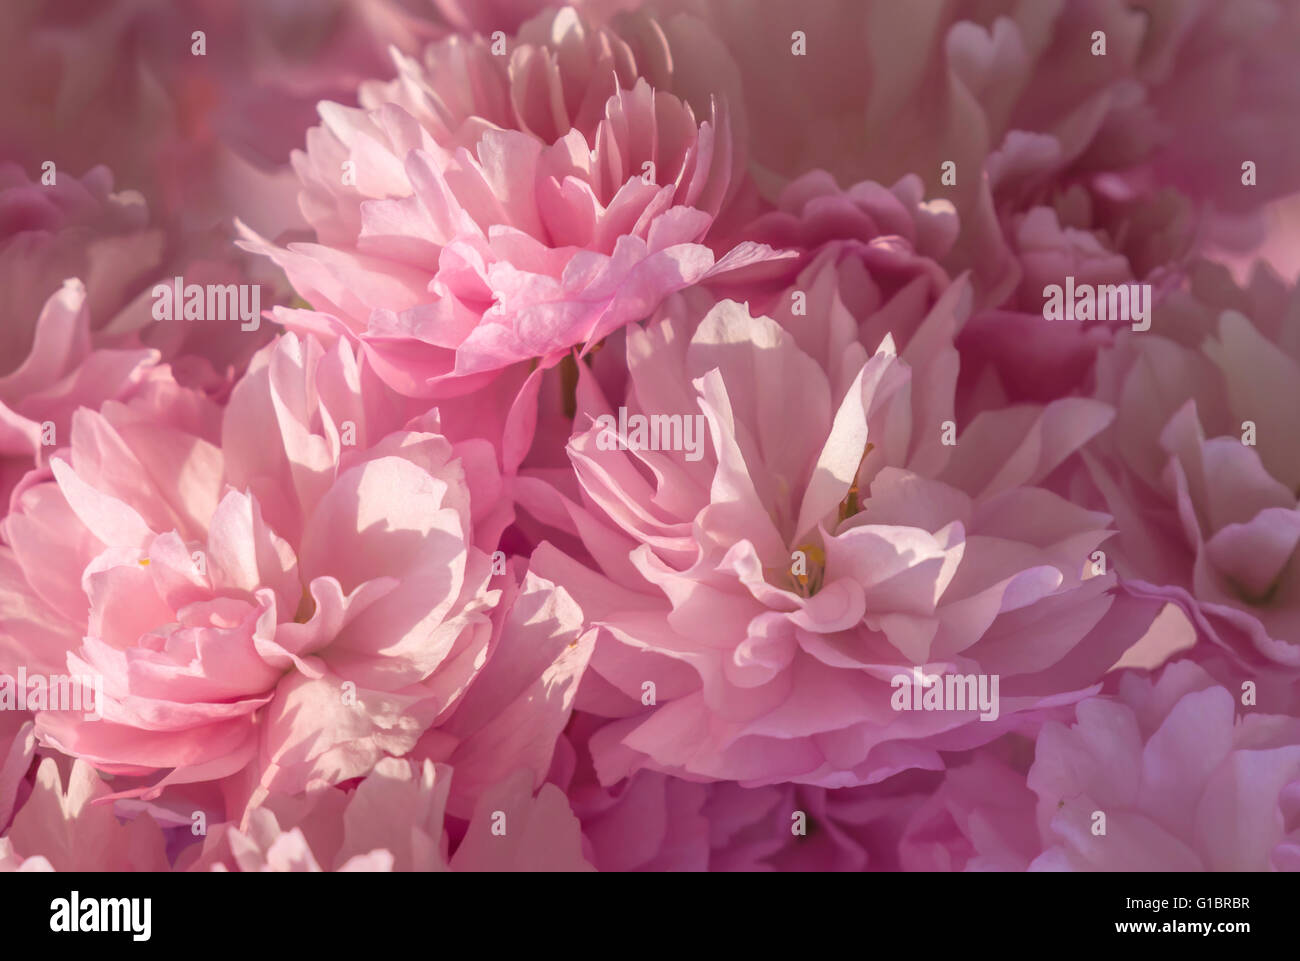 Vibrant pink blossom with soft pastel shades Stock Photo